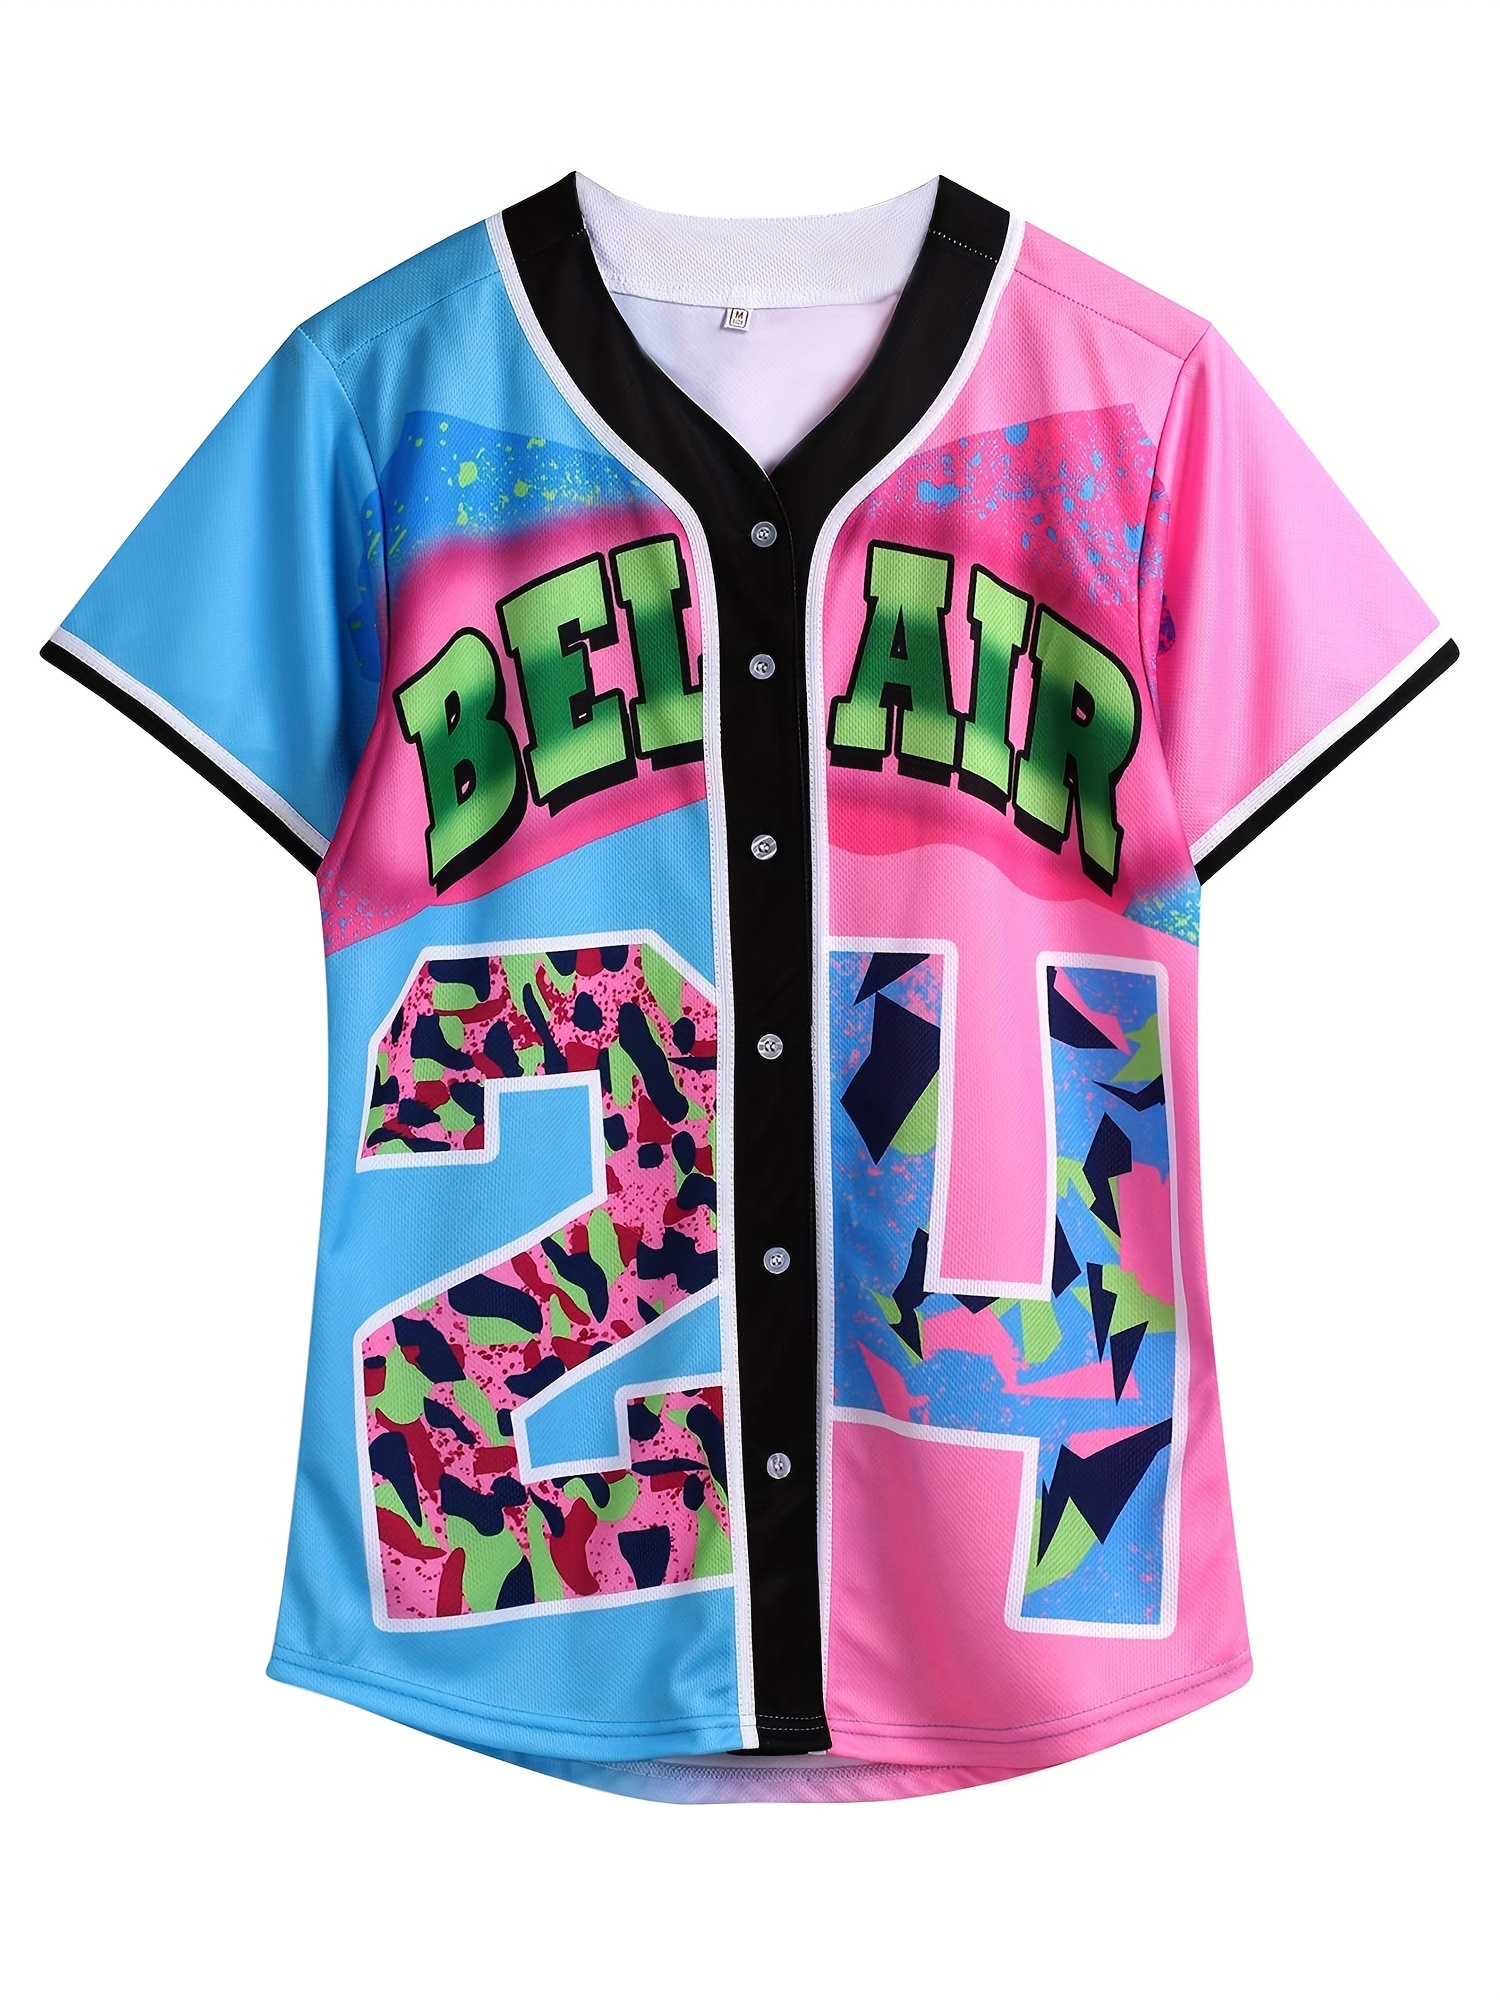 Unisex Vintage 90s Theme Party Hip Hop Baseball Jersey Hip Hop Clothing for Women Short Sleeve T-Shirts, Women's, Size: Small, Black